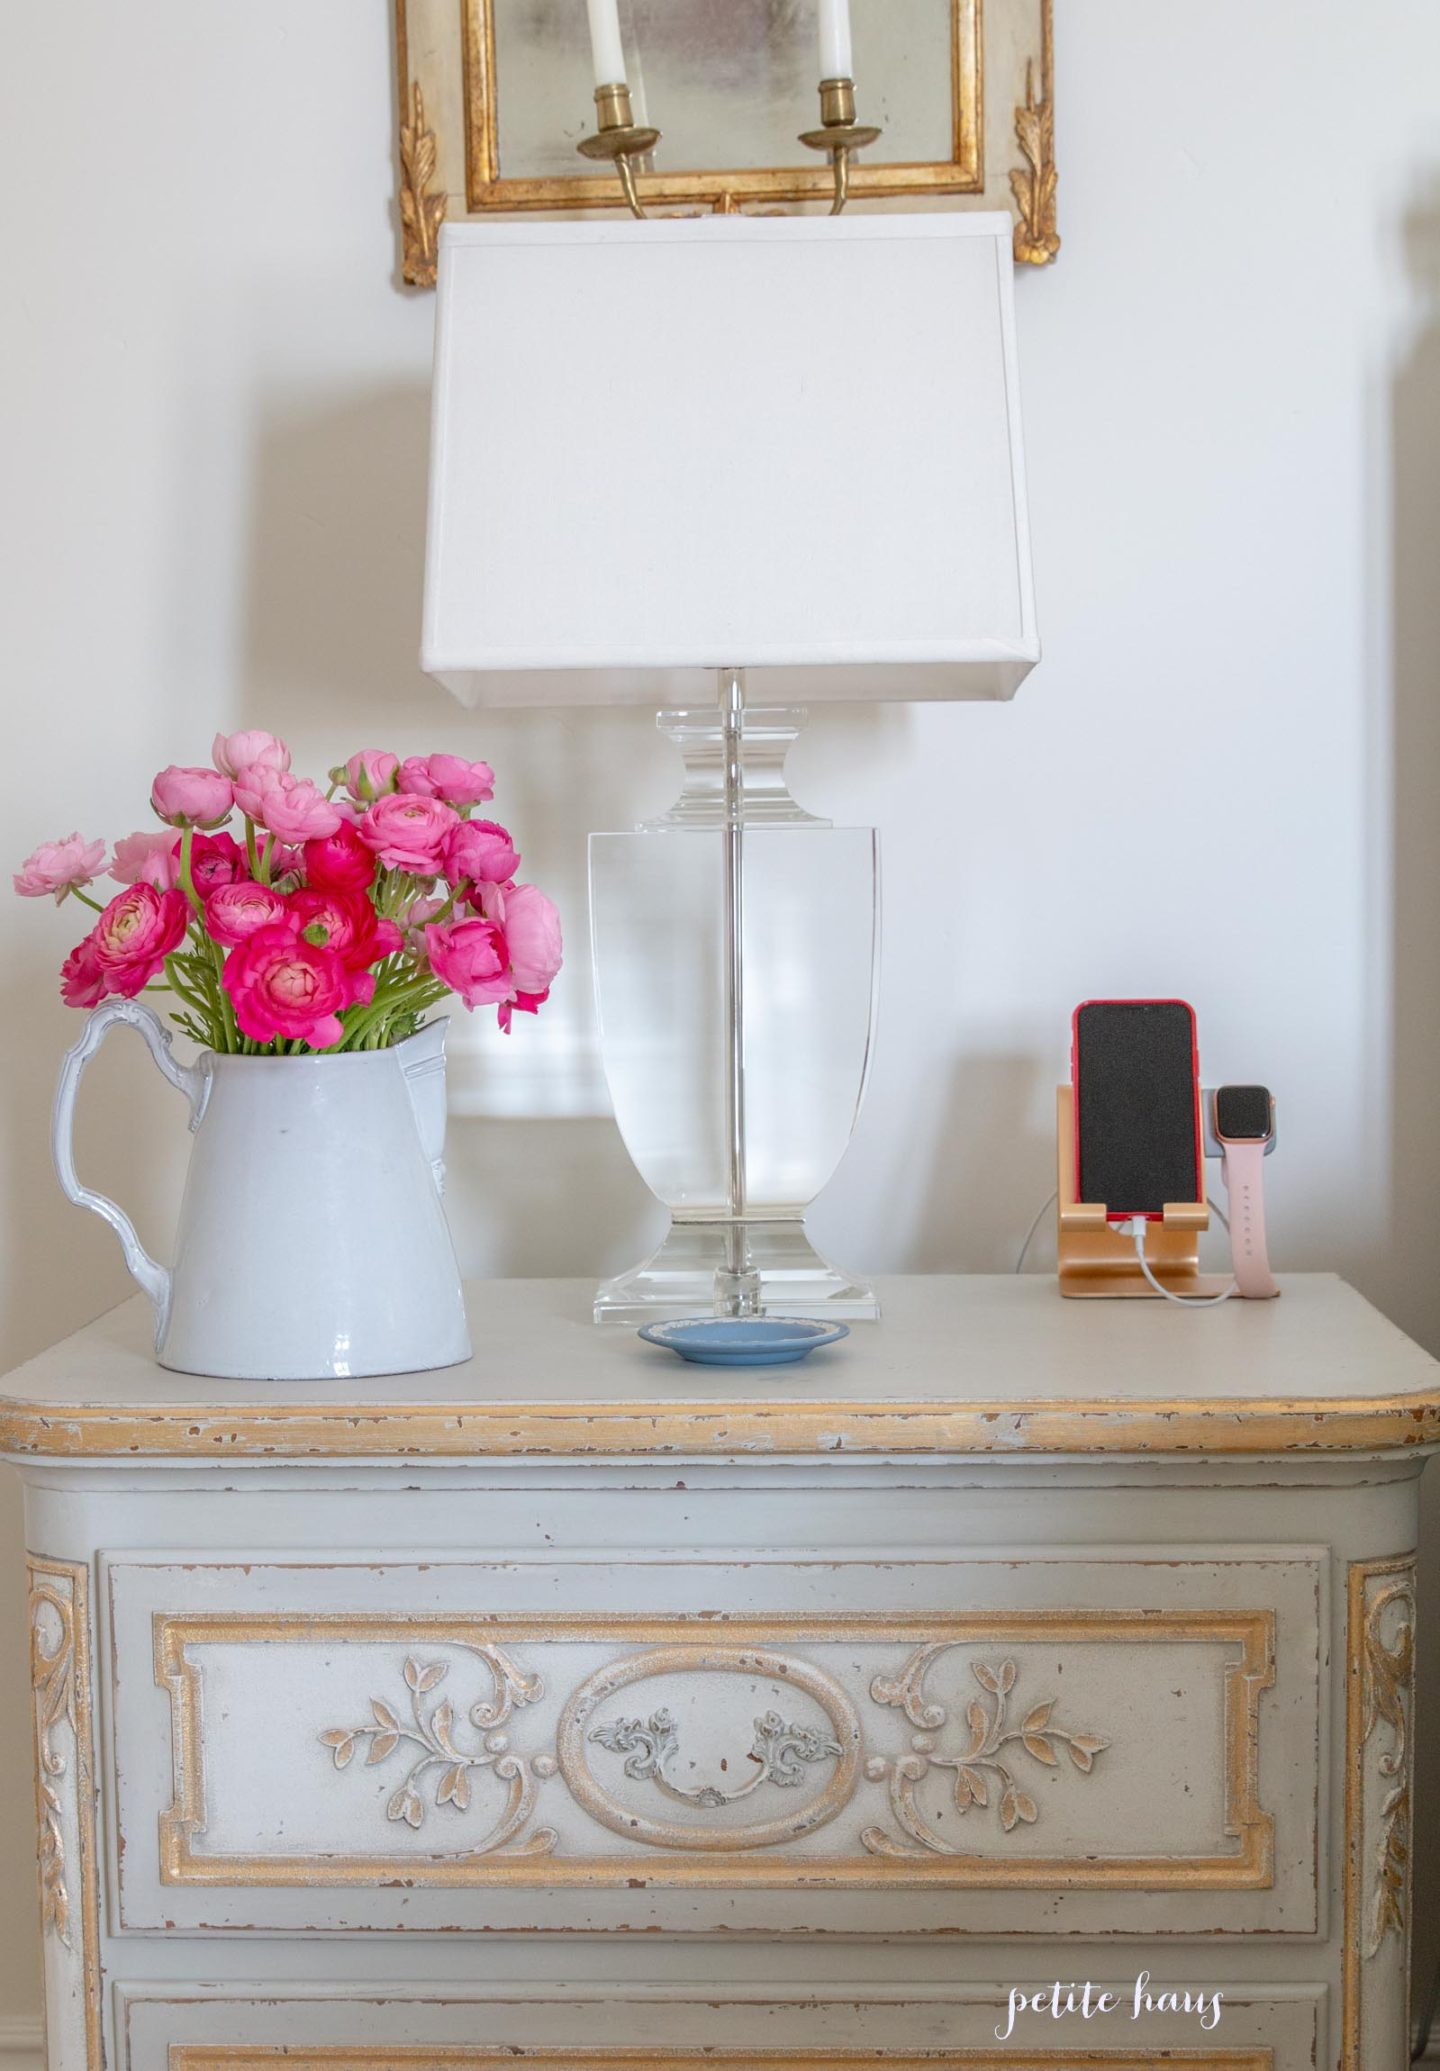 Favorite New Nightstand Must-Have